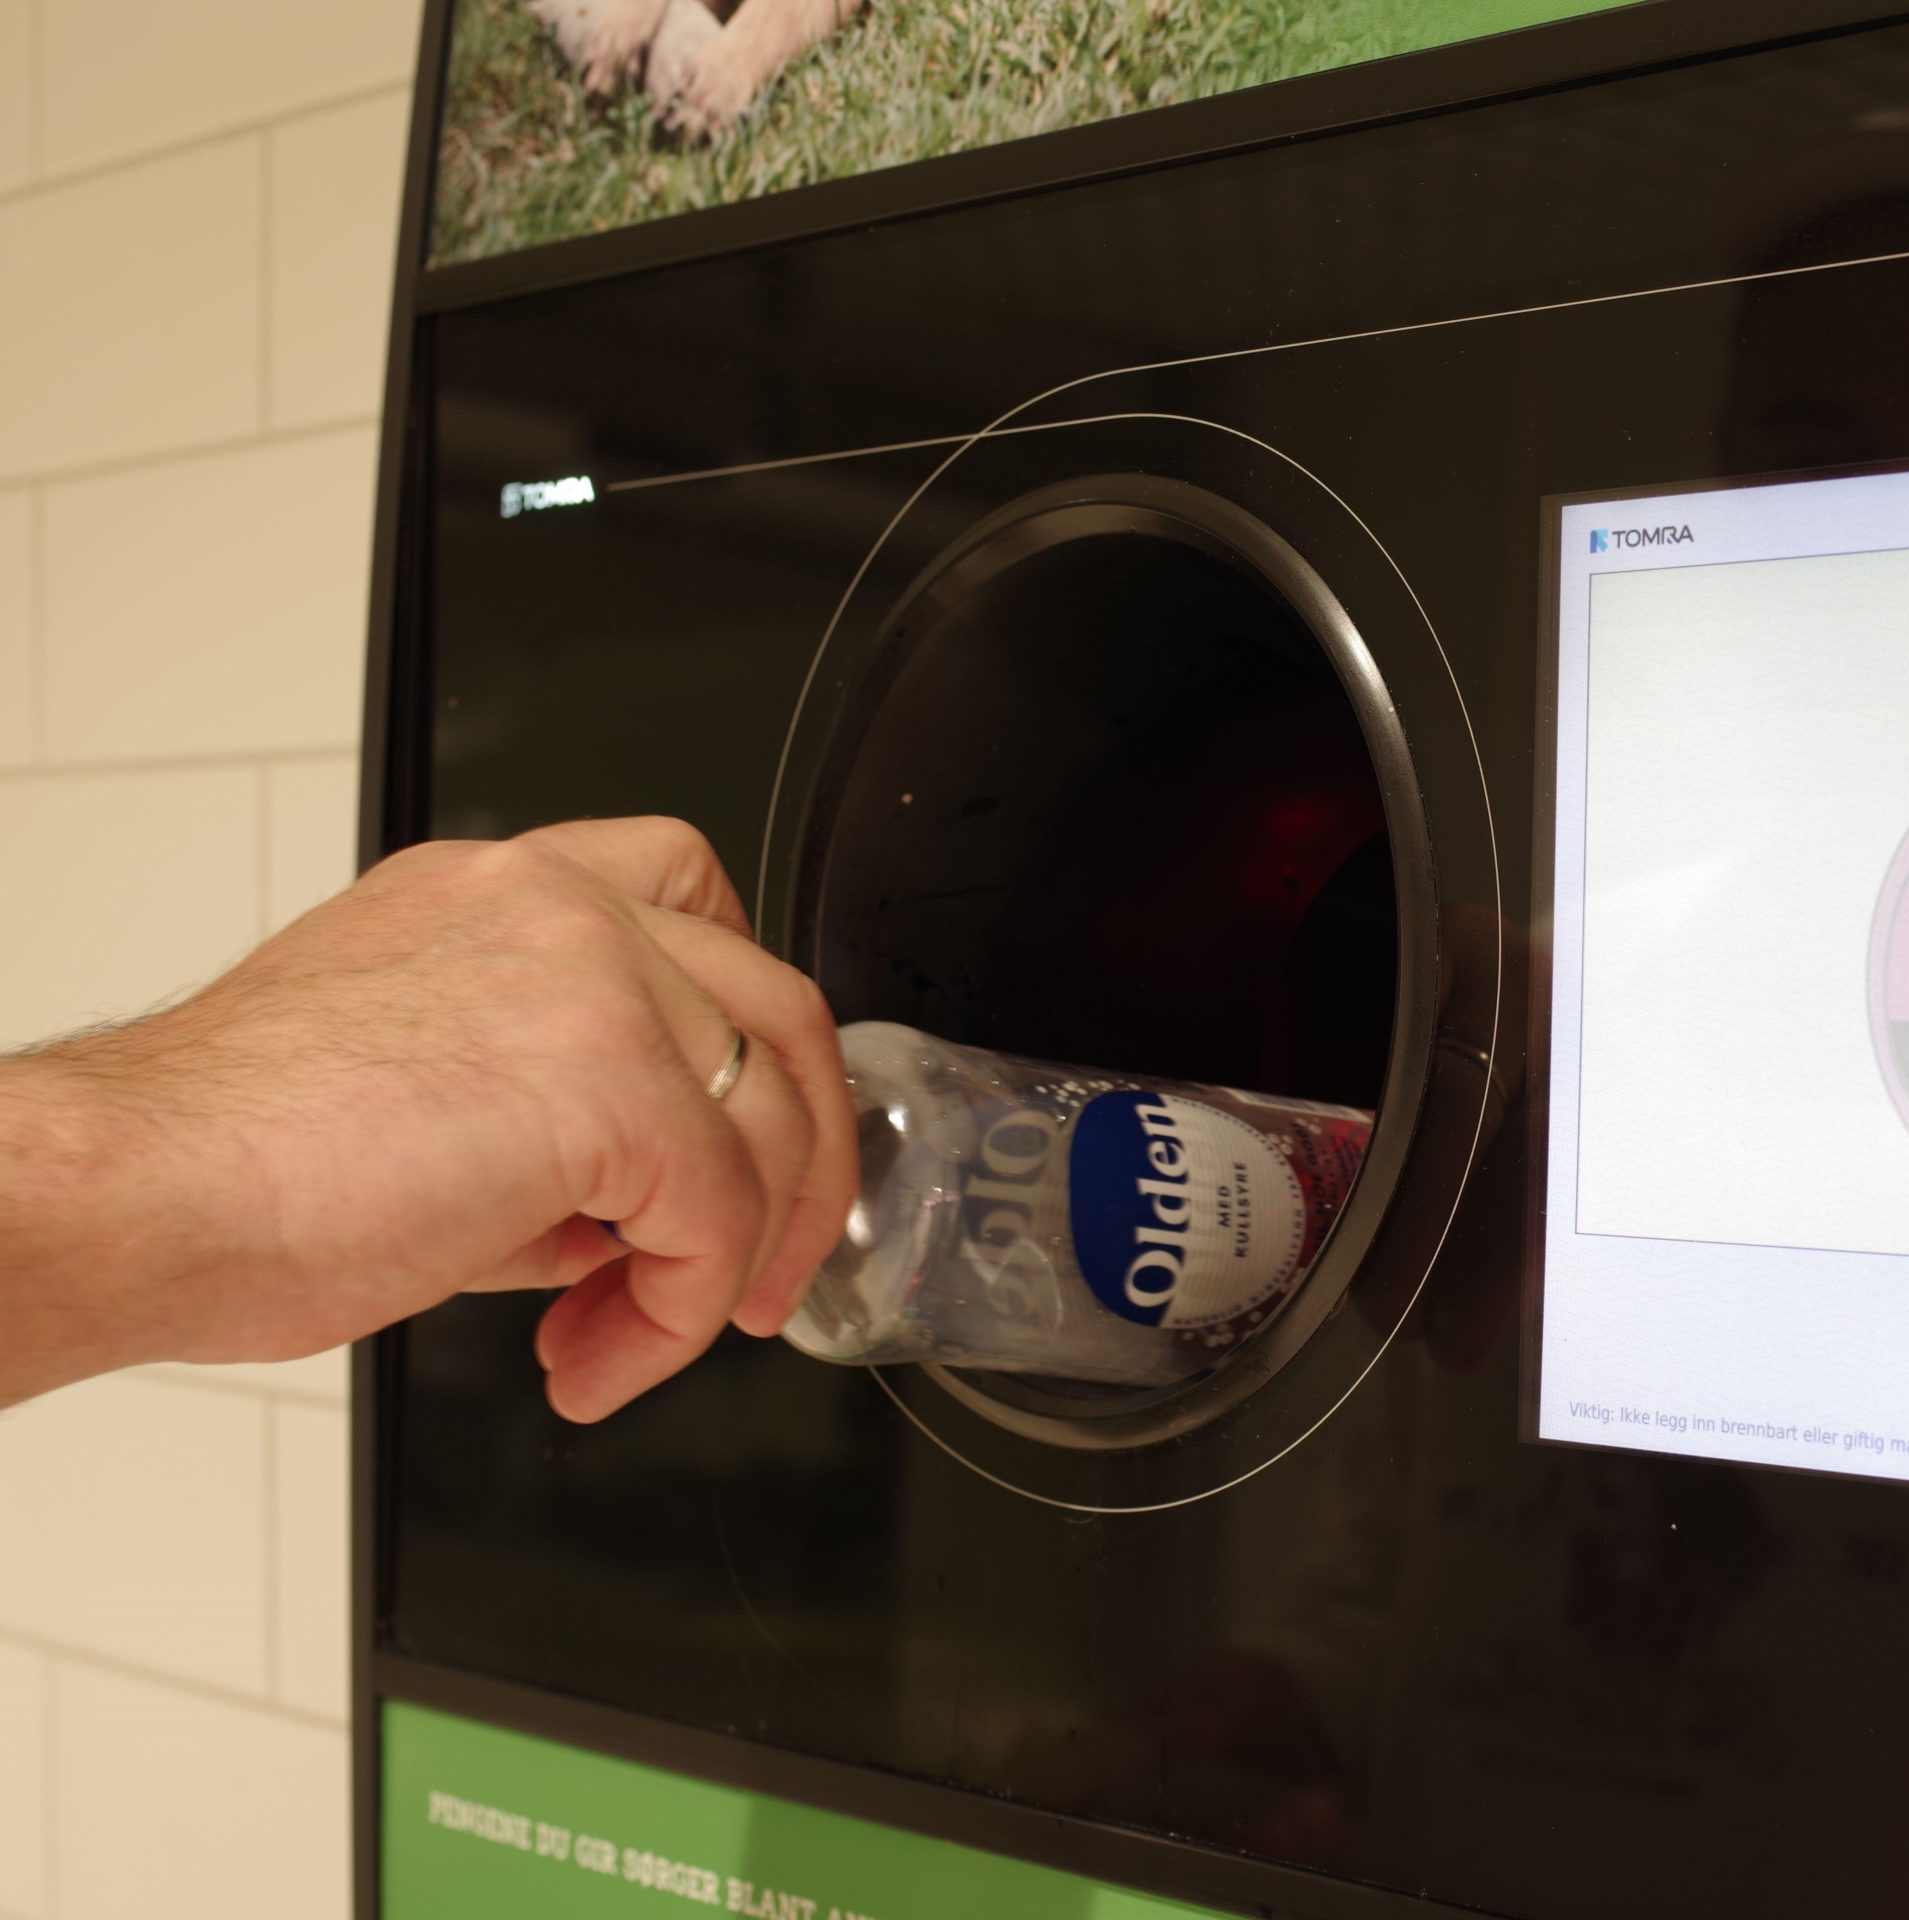 A can and bottle deposit return recycling system is seen in Norway in September 2020.